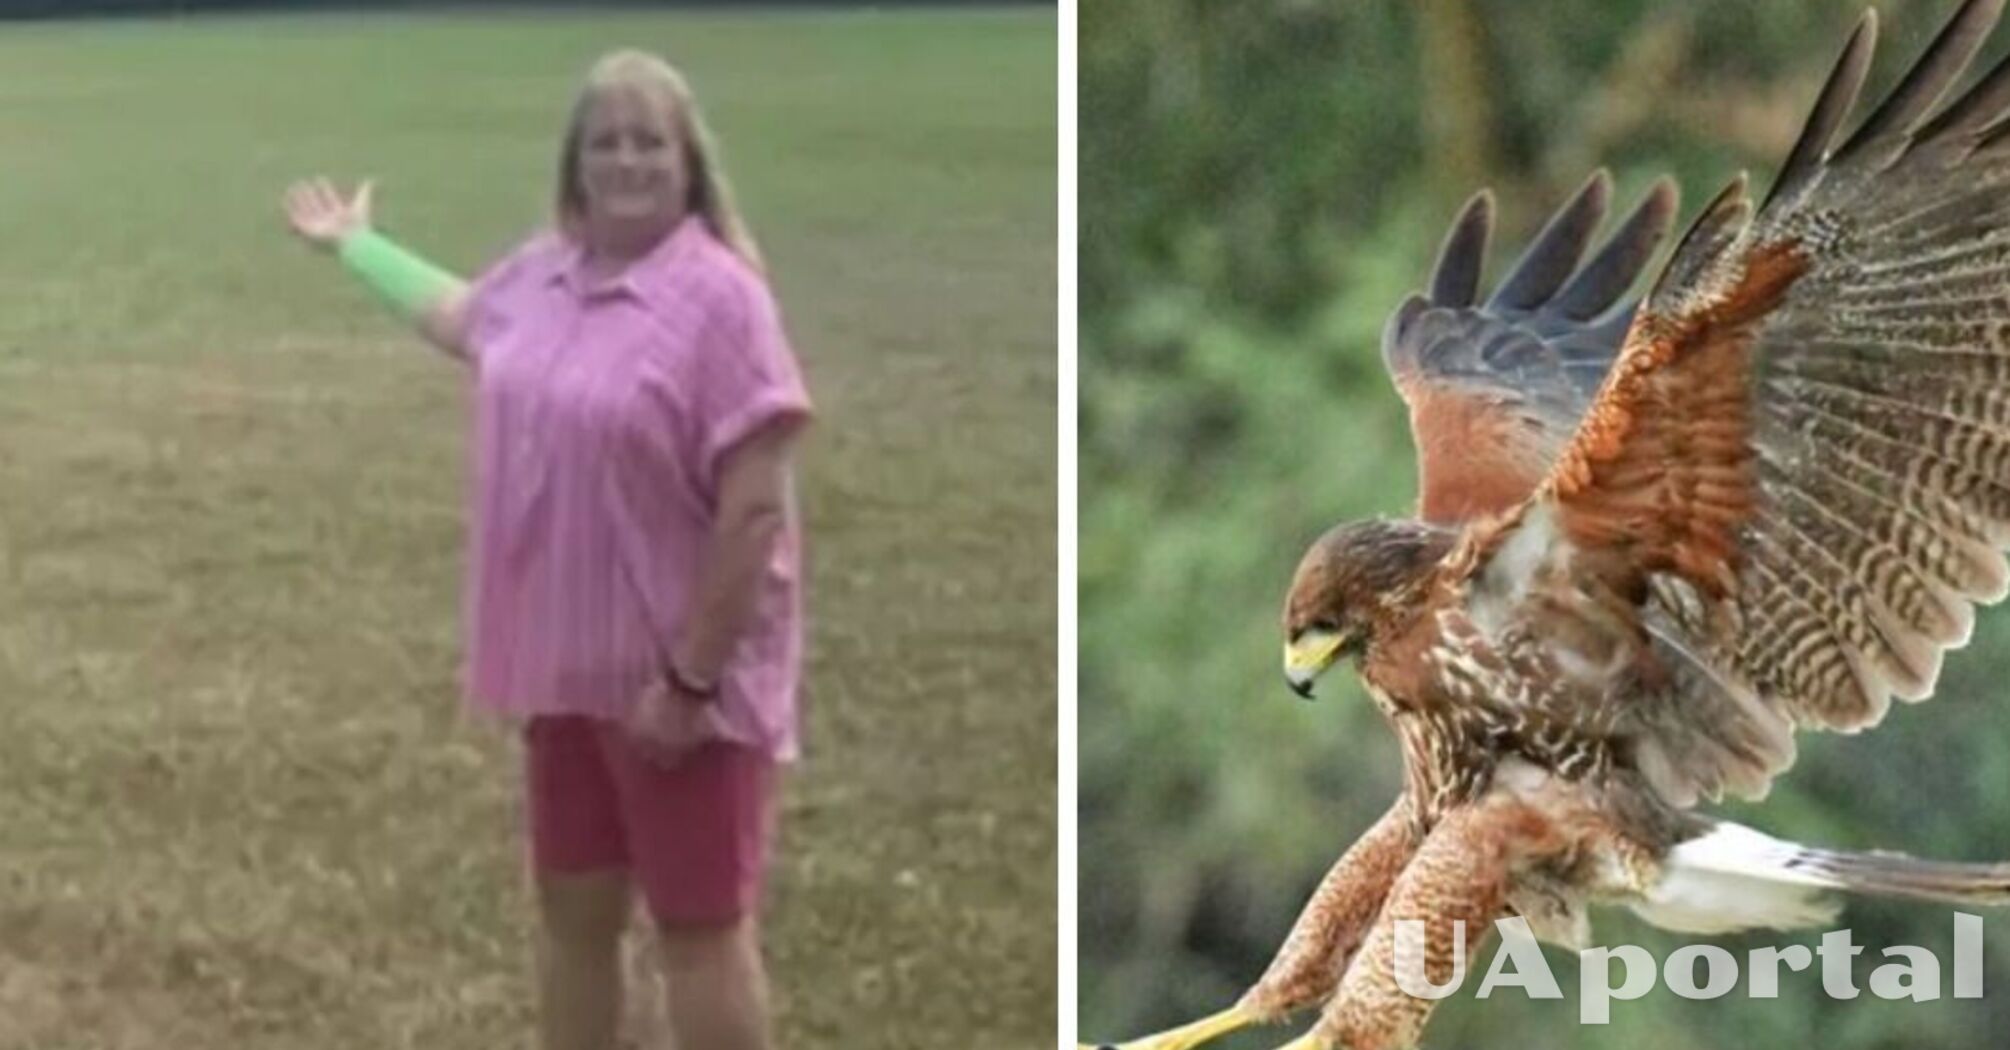 In the USA, a snake fell on a woman from the sky and then she was attacked by a hawk (photo)